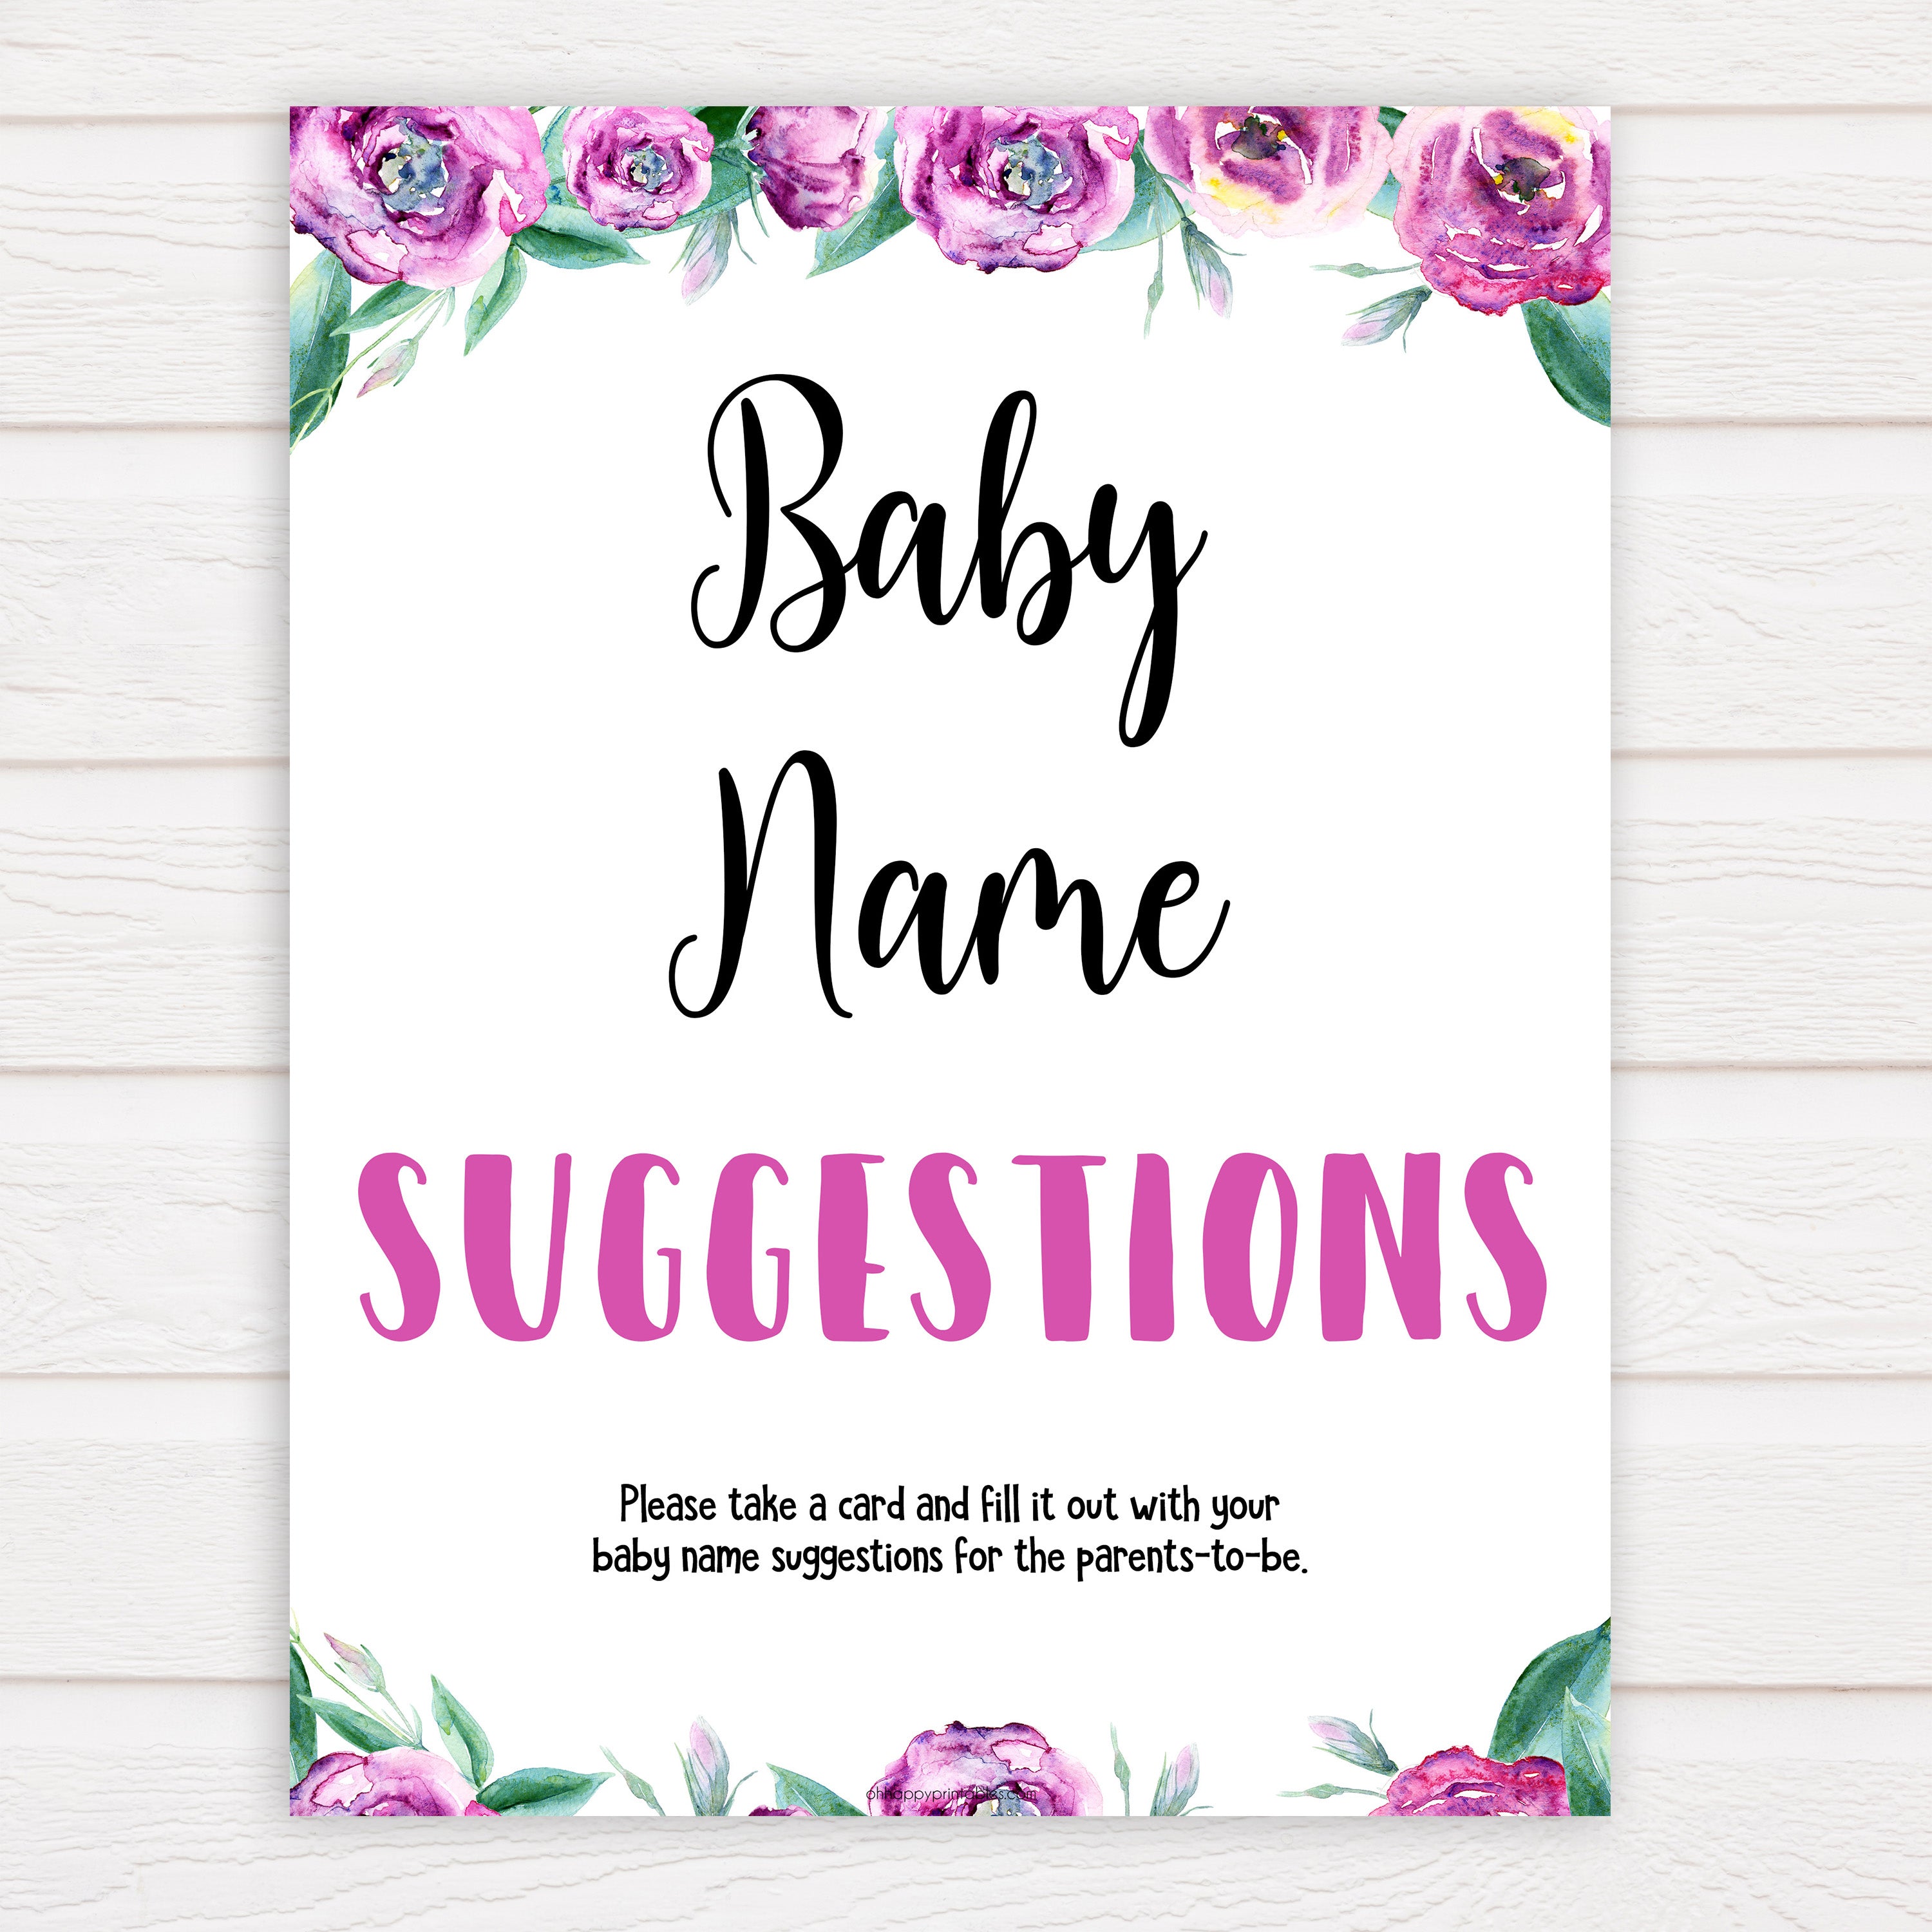 Purple peonies baby name suggestions baby shower games, printable baby shower games, fun baby shower games, baby shower games, popular baby shower games, floral baby shower games, purple baby shower themes